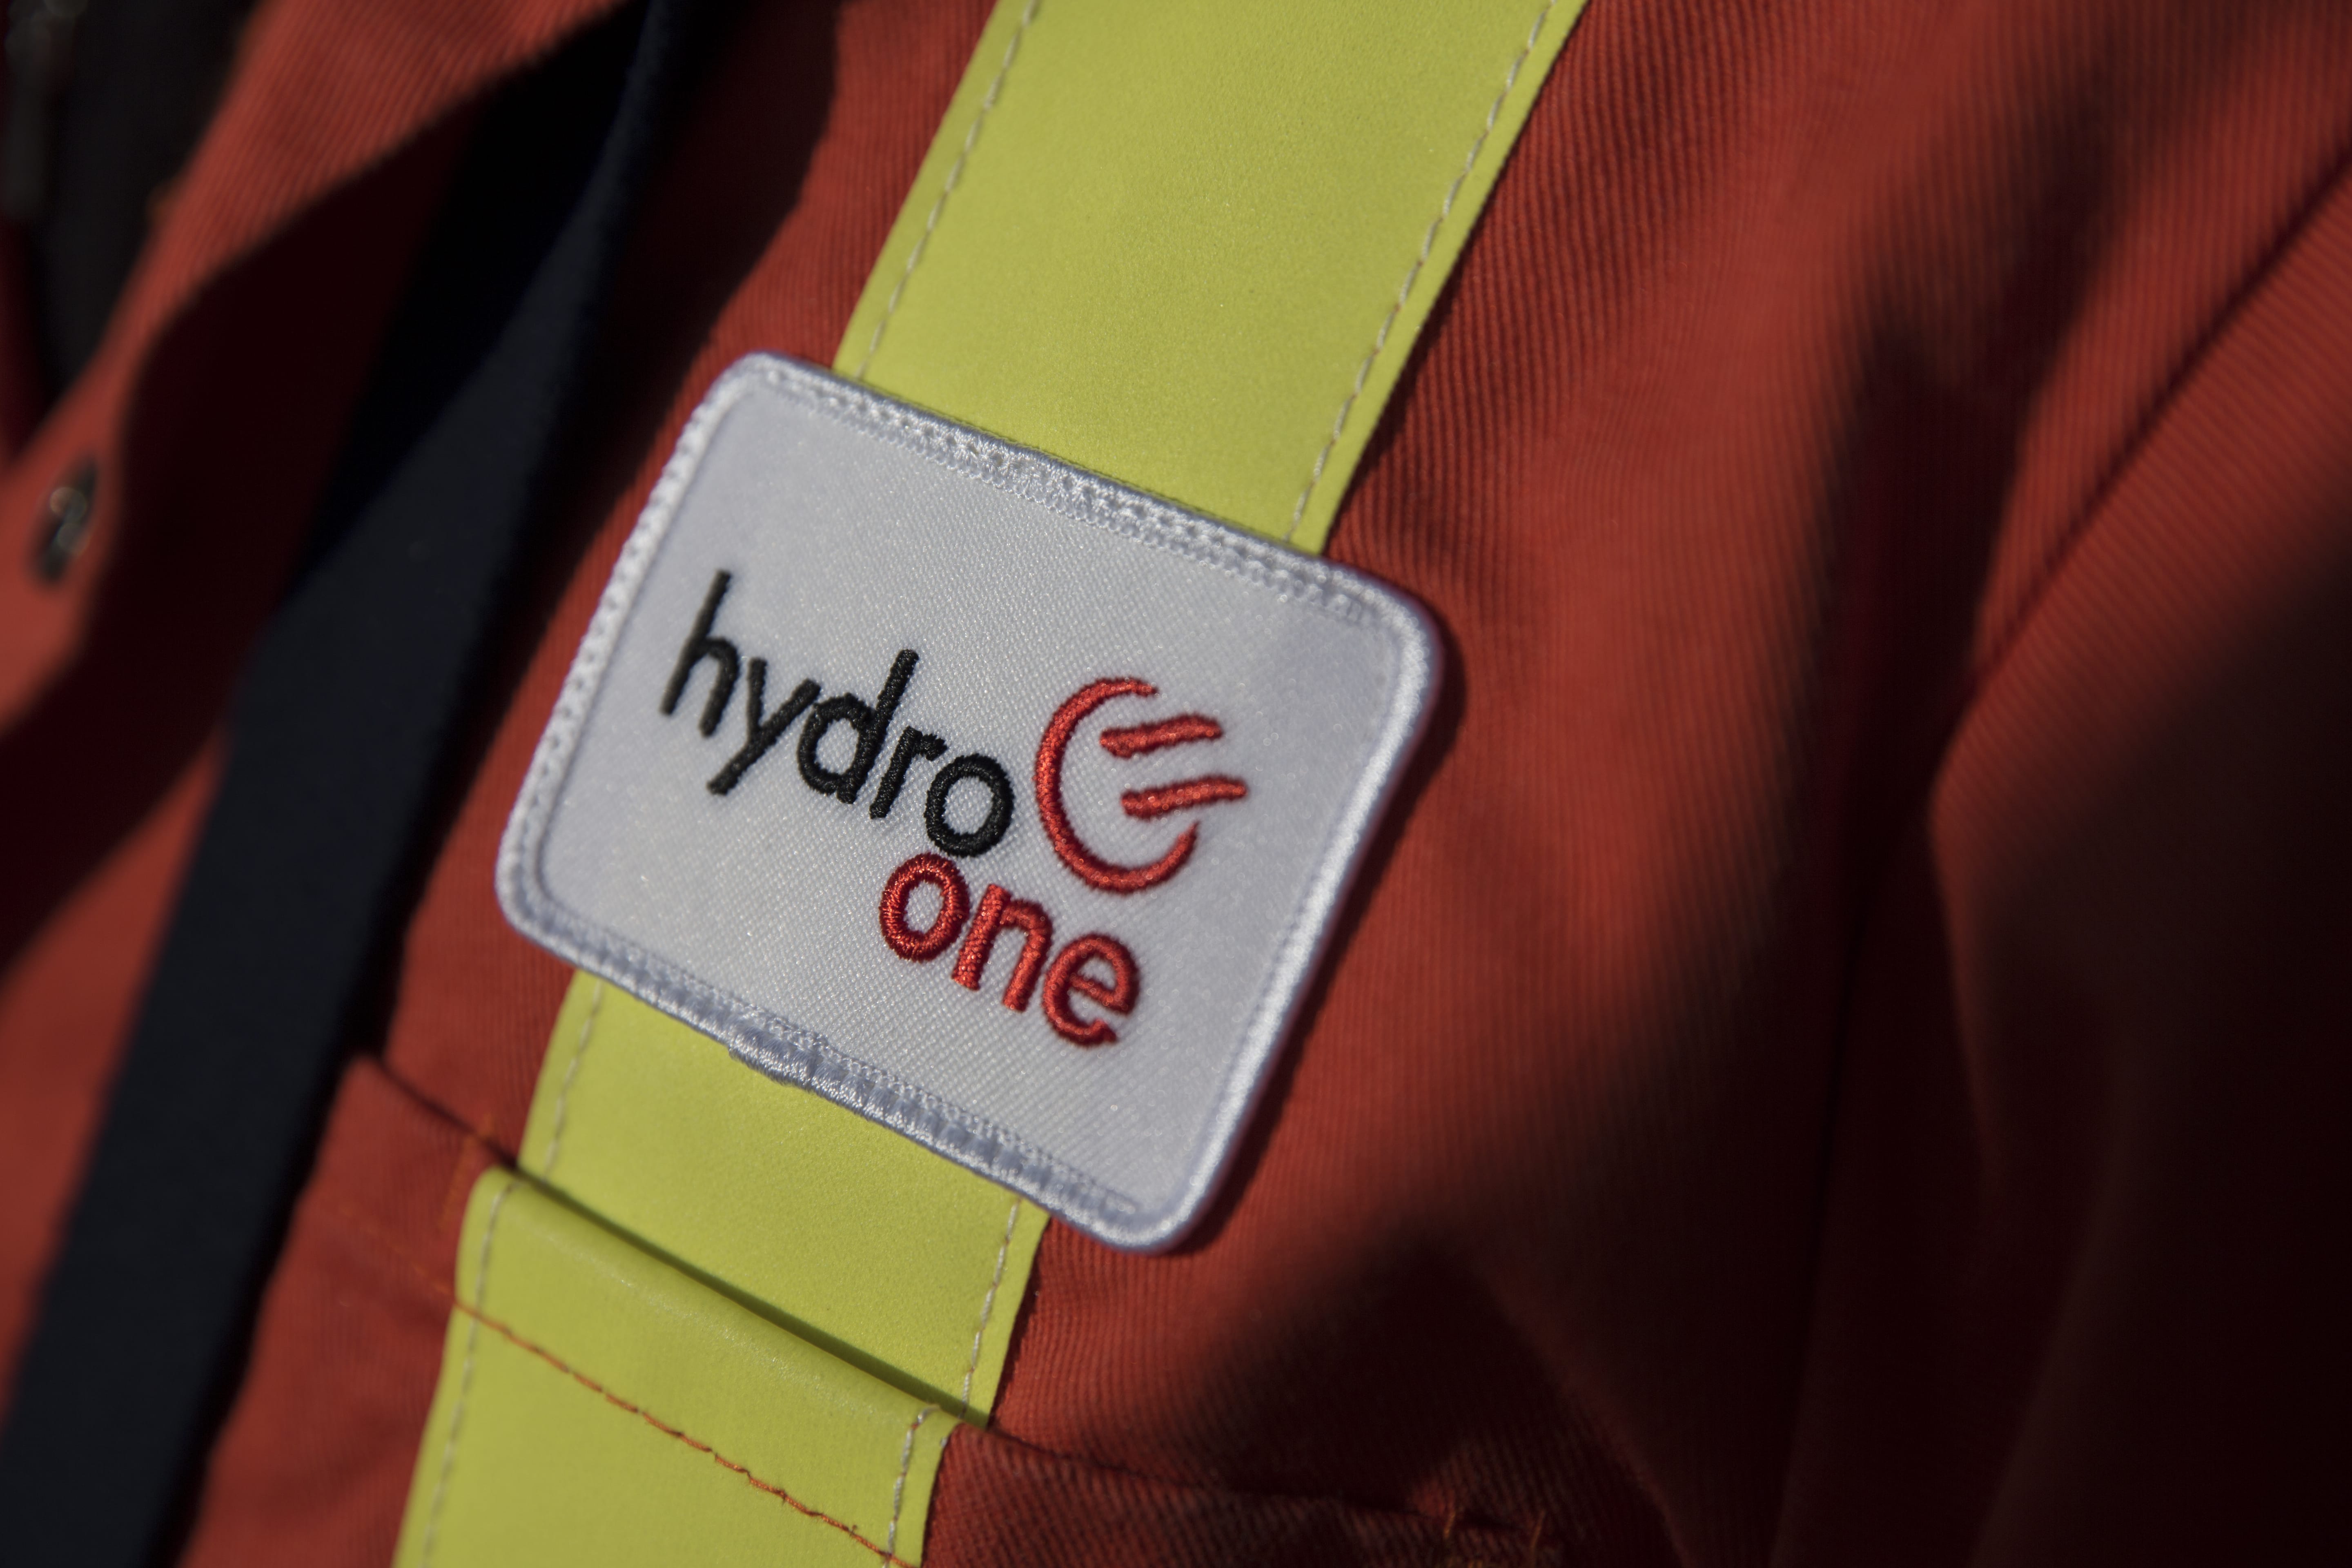 Photo of a Hydro One Networks logo patch